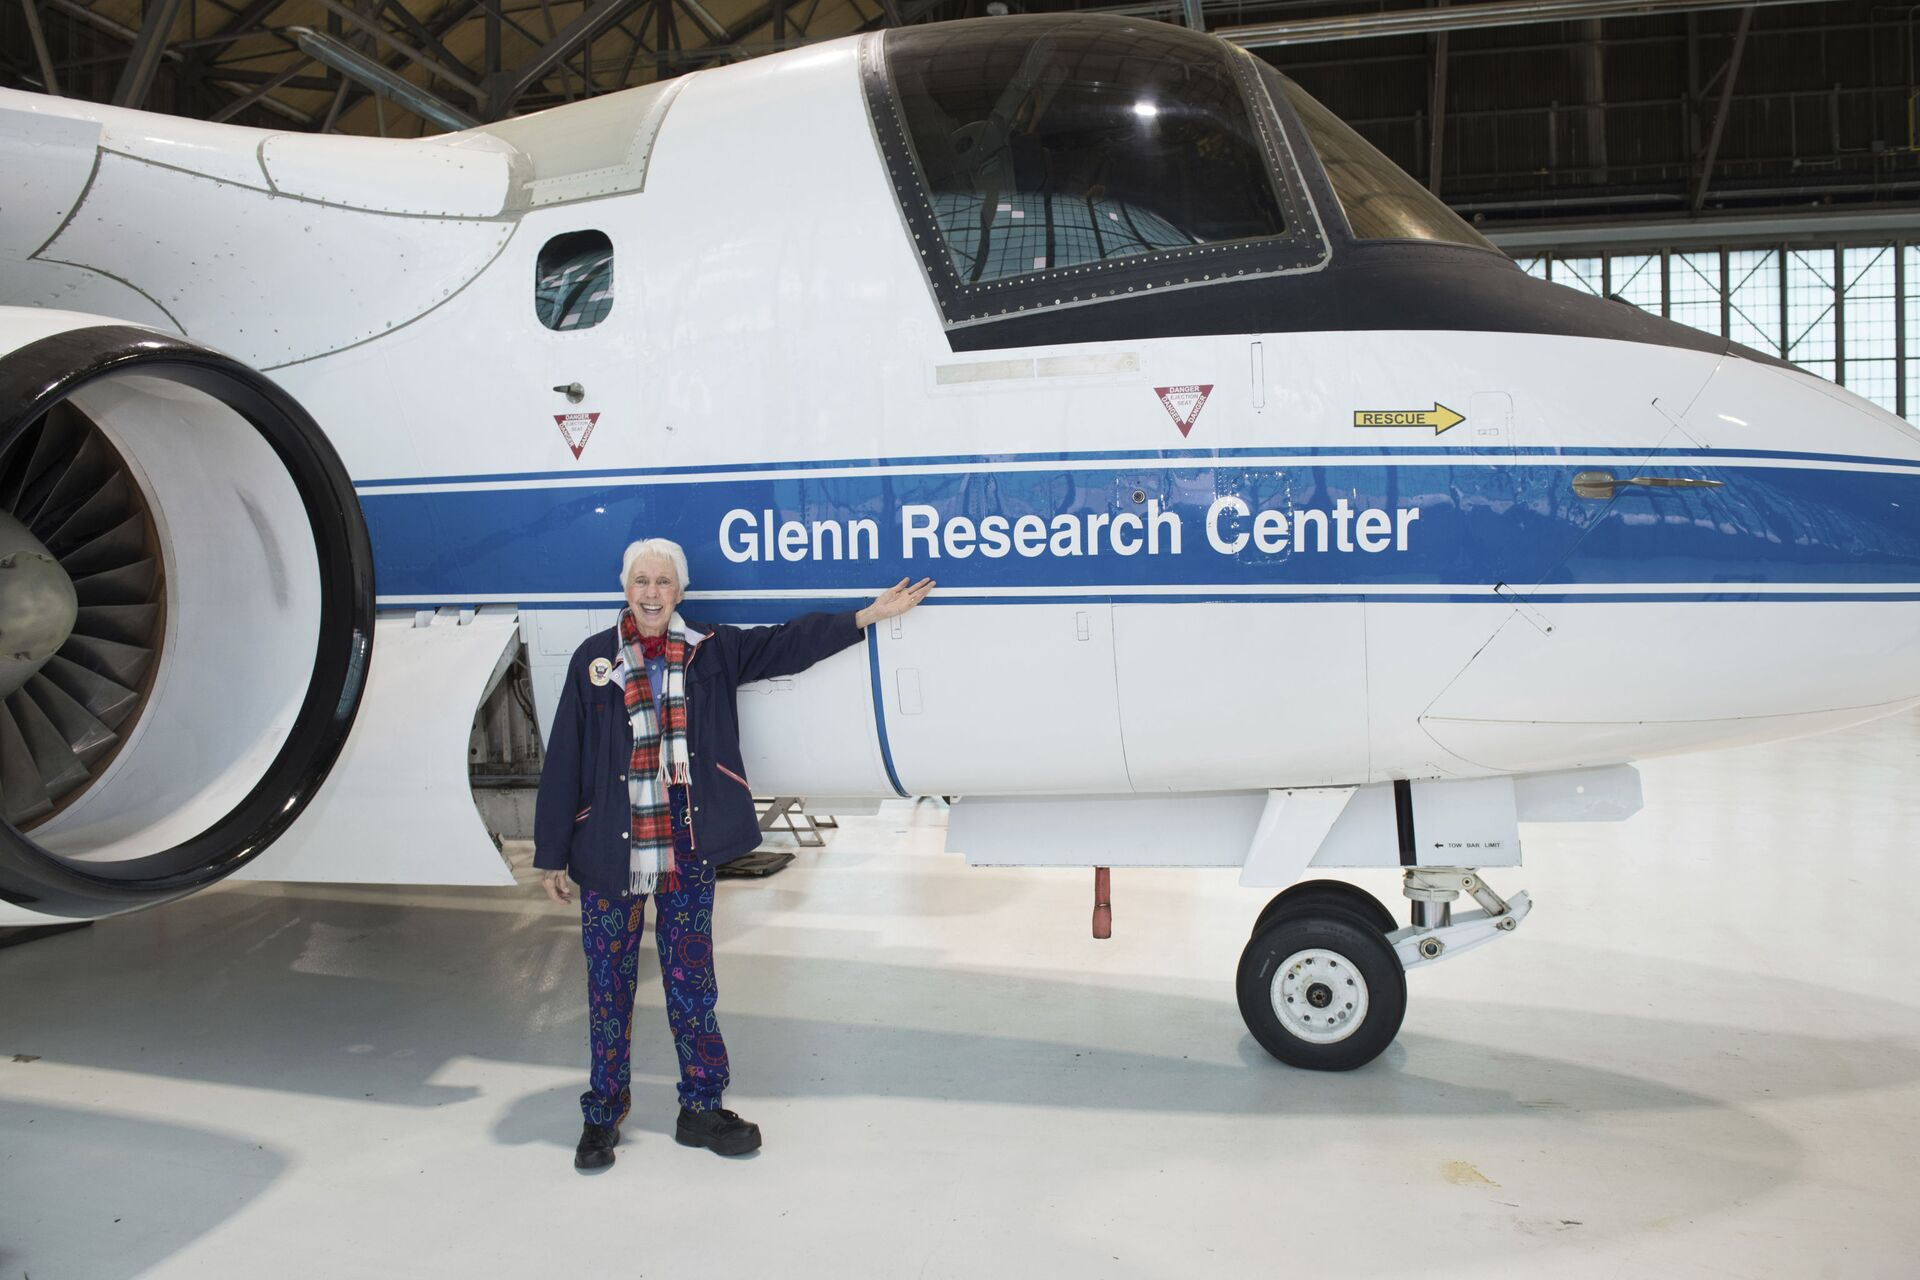 In this 2019 photo made available by NASA, Mercury 13 astronaut trainee Wally Funk visits the Glenn Research Center at Lewis Field in Cleveland, Ohio - Sputnik International, 1920, 07.09.2021